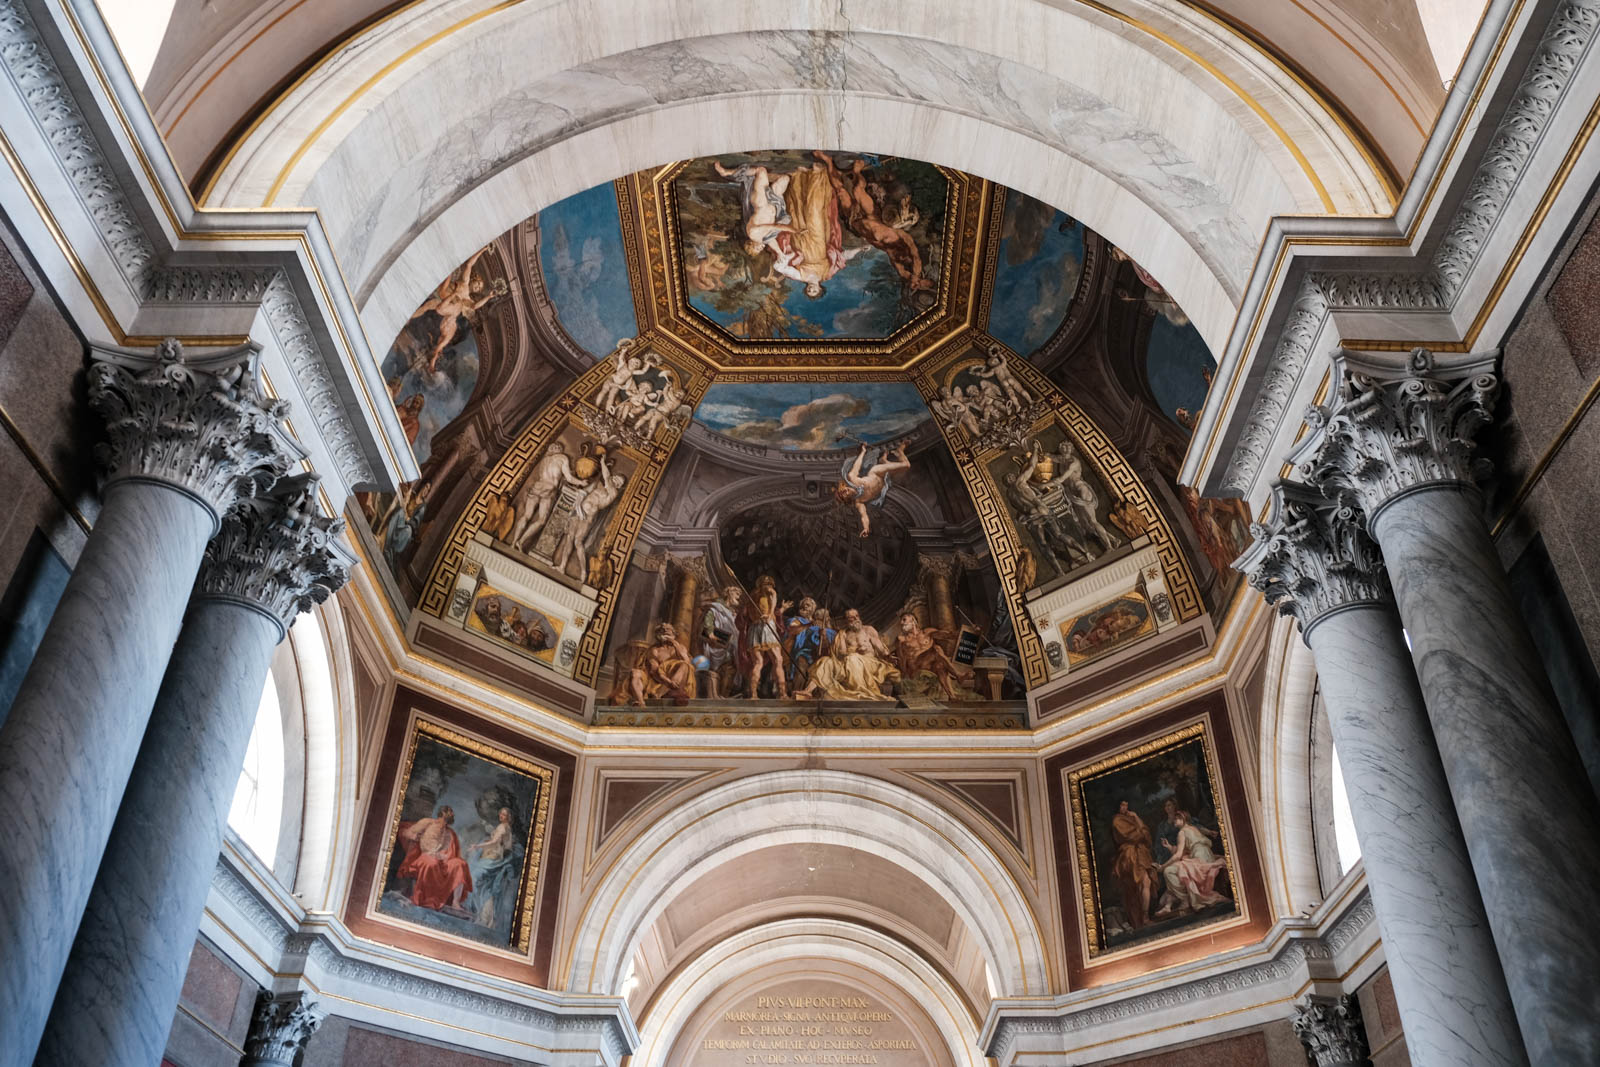 Vatican Museums in Italy